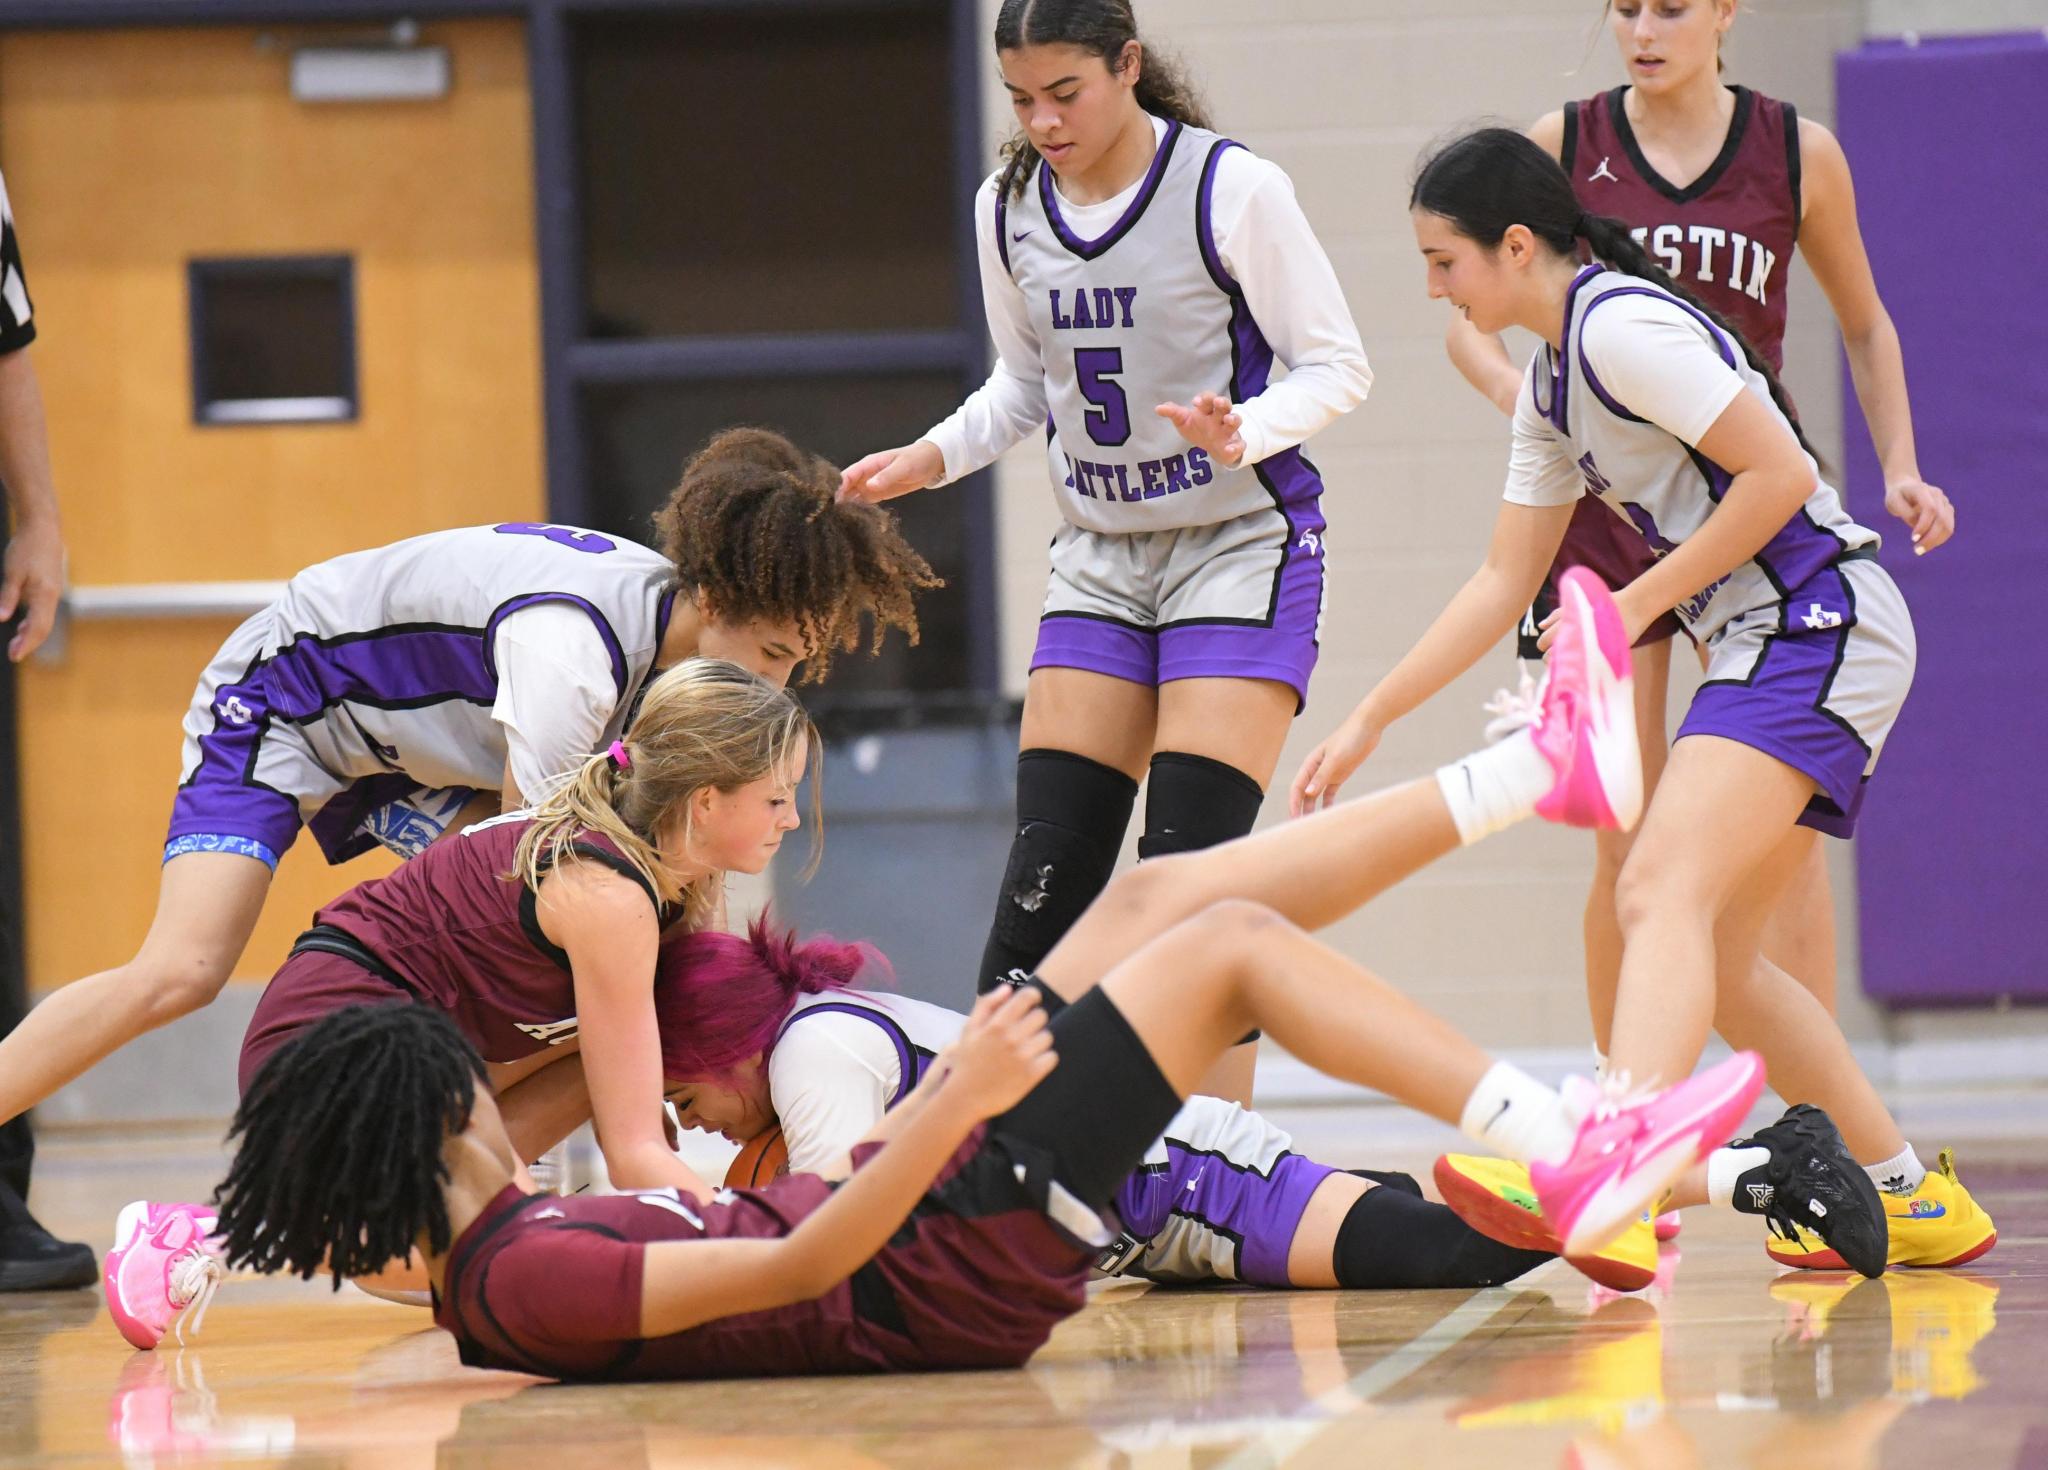 Strong fourth quarter rally pushes Lady Rattlers over Austin High